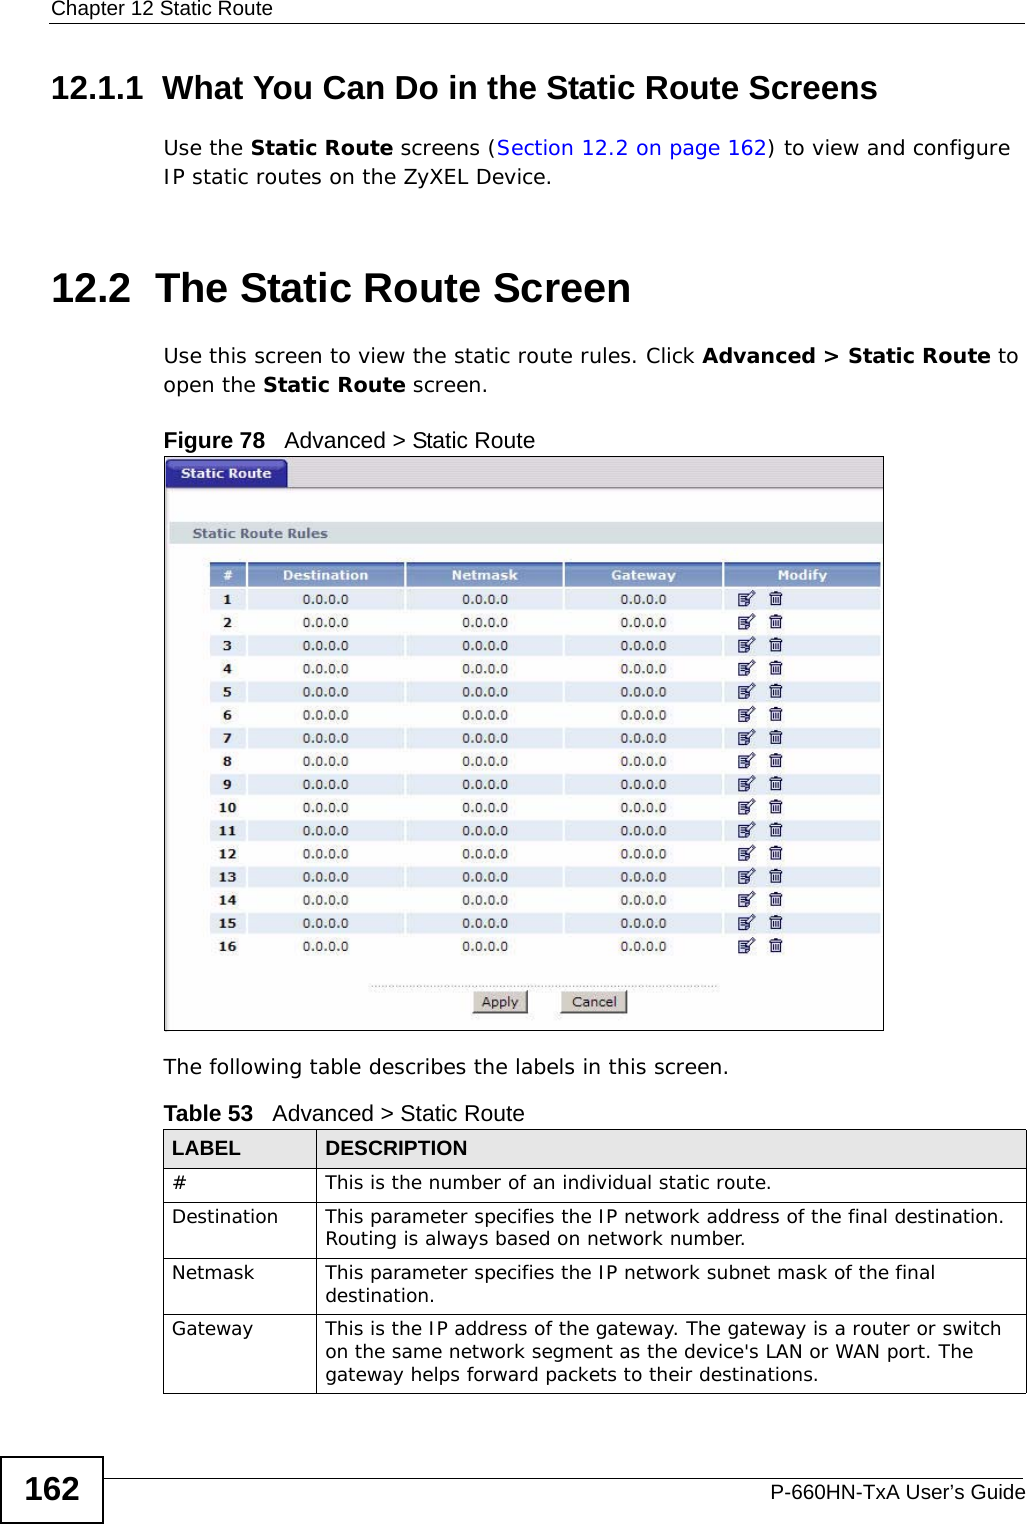 Chapter 12 Static RouteP-660HN-TxA User’s Guide16212.1.1  What You Can Do in the Static Route ScreensUse the Static Route screens (Section 12.2 on page 162) to view and configure IP static routes on the ZyXEL Device.12.2  The Static Route ScreenUse this screen to view the static route rules. Click Advanced &gt; Static Route to open the Static Route screen.Figure 78   Advanced &gt; Static RouteThe following table describes the labels in this screen. Table 53   Advanced &gt; Static RouteLABEL DESCRIPTION#This is the number of an individual static route.Destination This parameter specifies the IP network address of the final destination. Routing is always based on network number. Netmask This parameter specifies the IP network subnet mask of the final destination.Gateway This is the IP address of the gateway. The gateway is a router or switch on the same network segment as the device&apos;s LAN or WAN port. The gateway helps forward packets to their destinations.